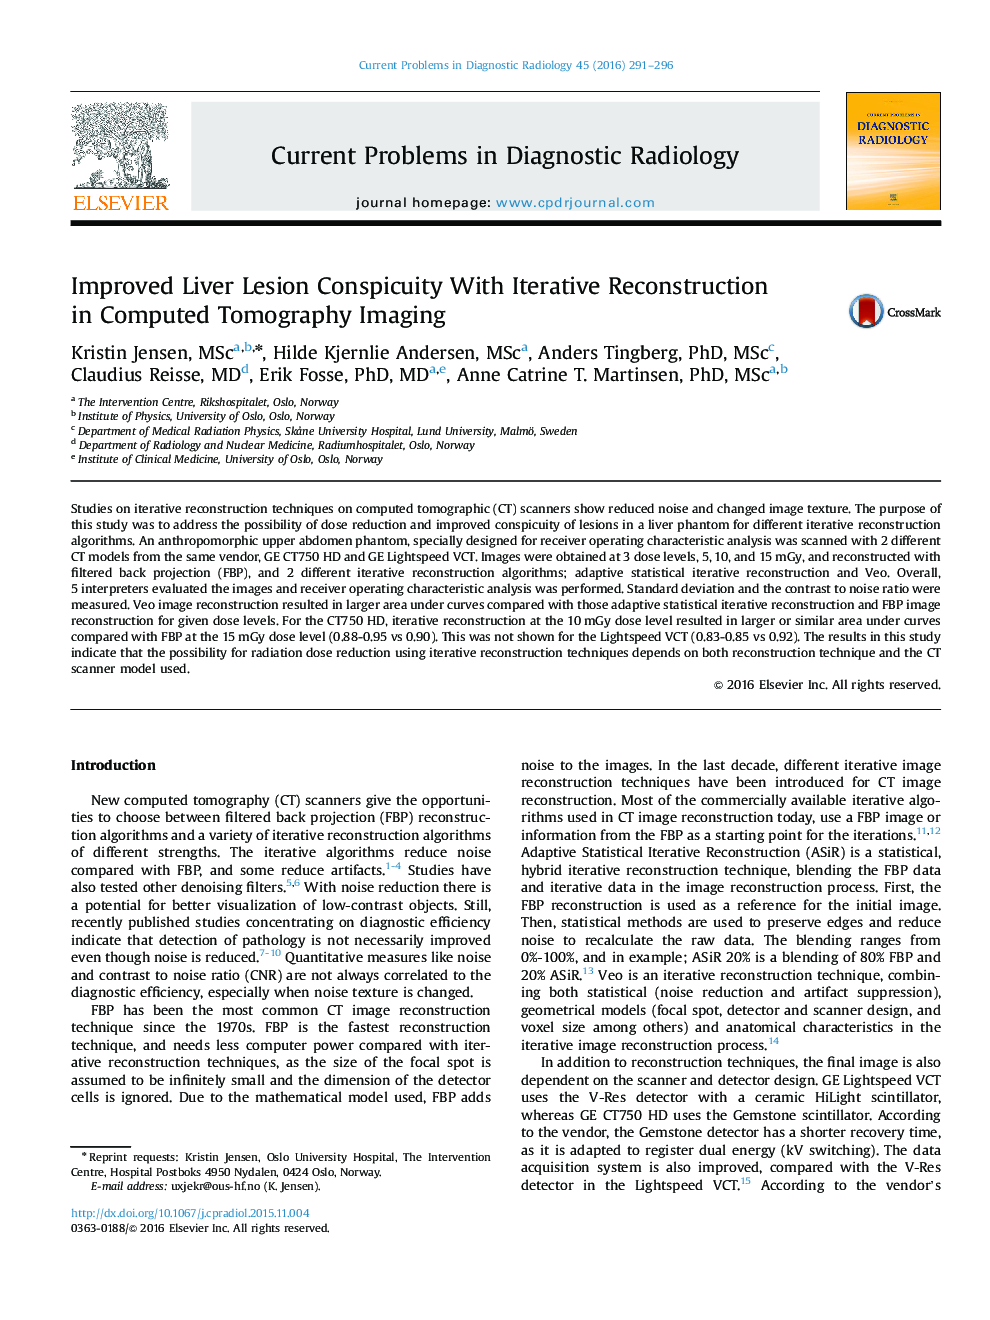 Improved Liver Lesion Conspicuity With Iterative Reconstruction in Computed Tomography Imaging